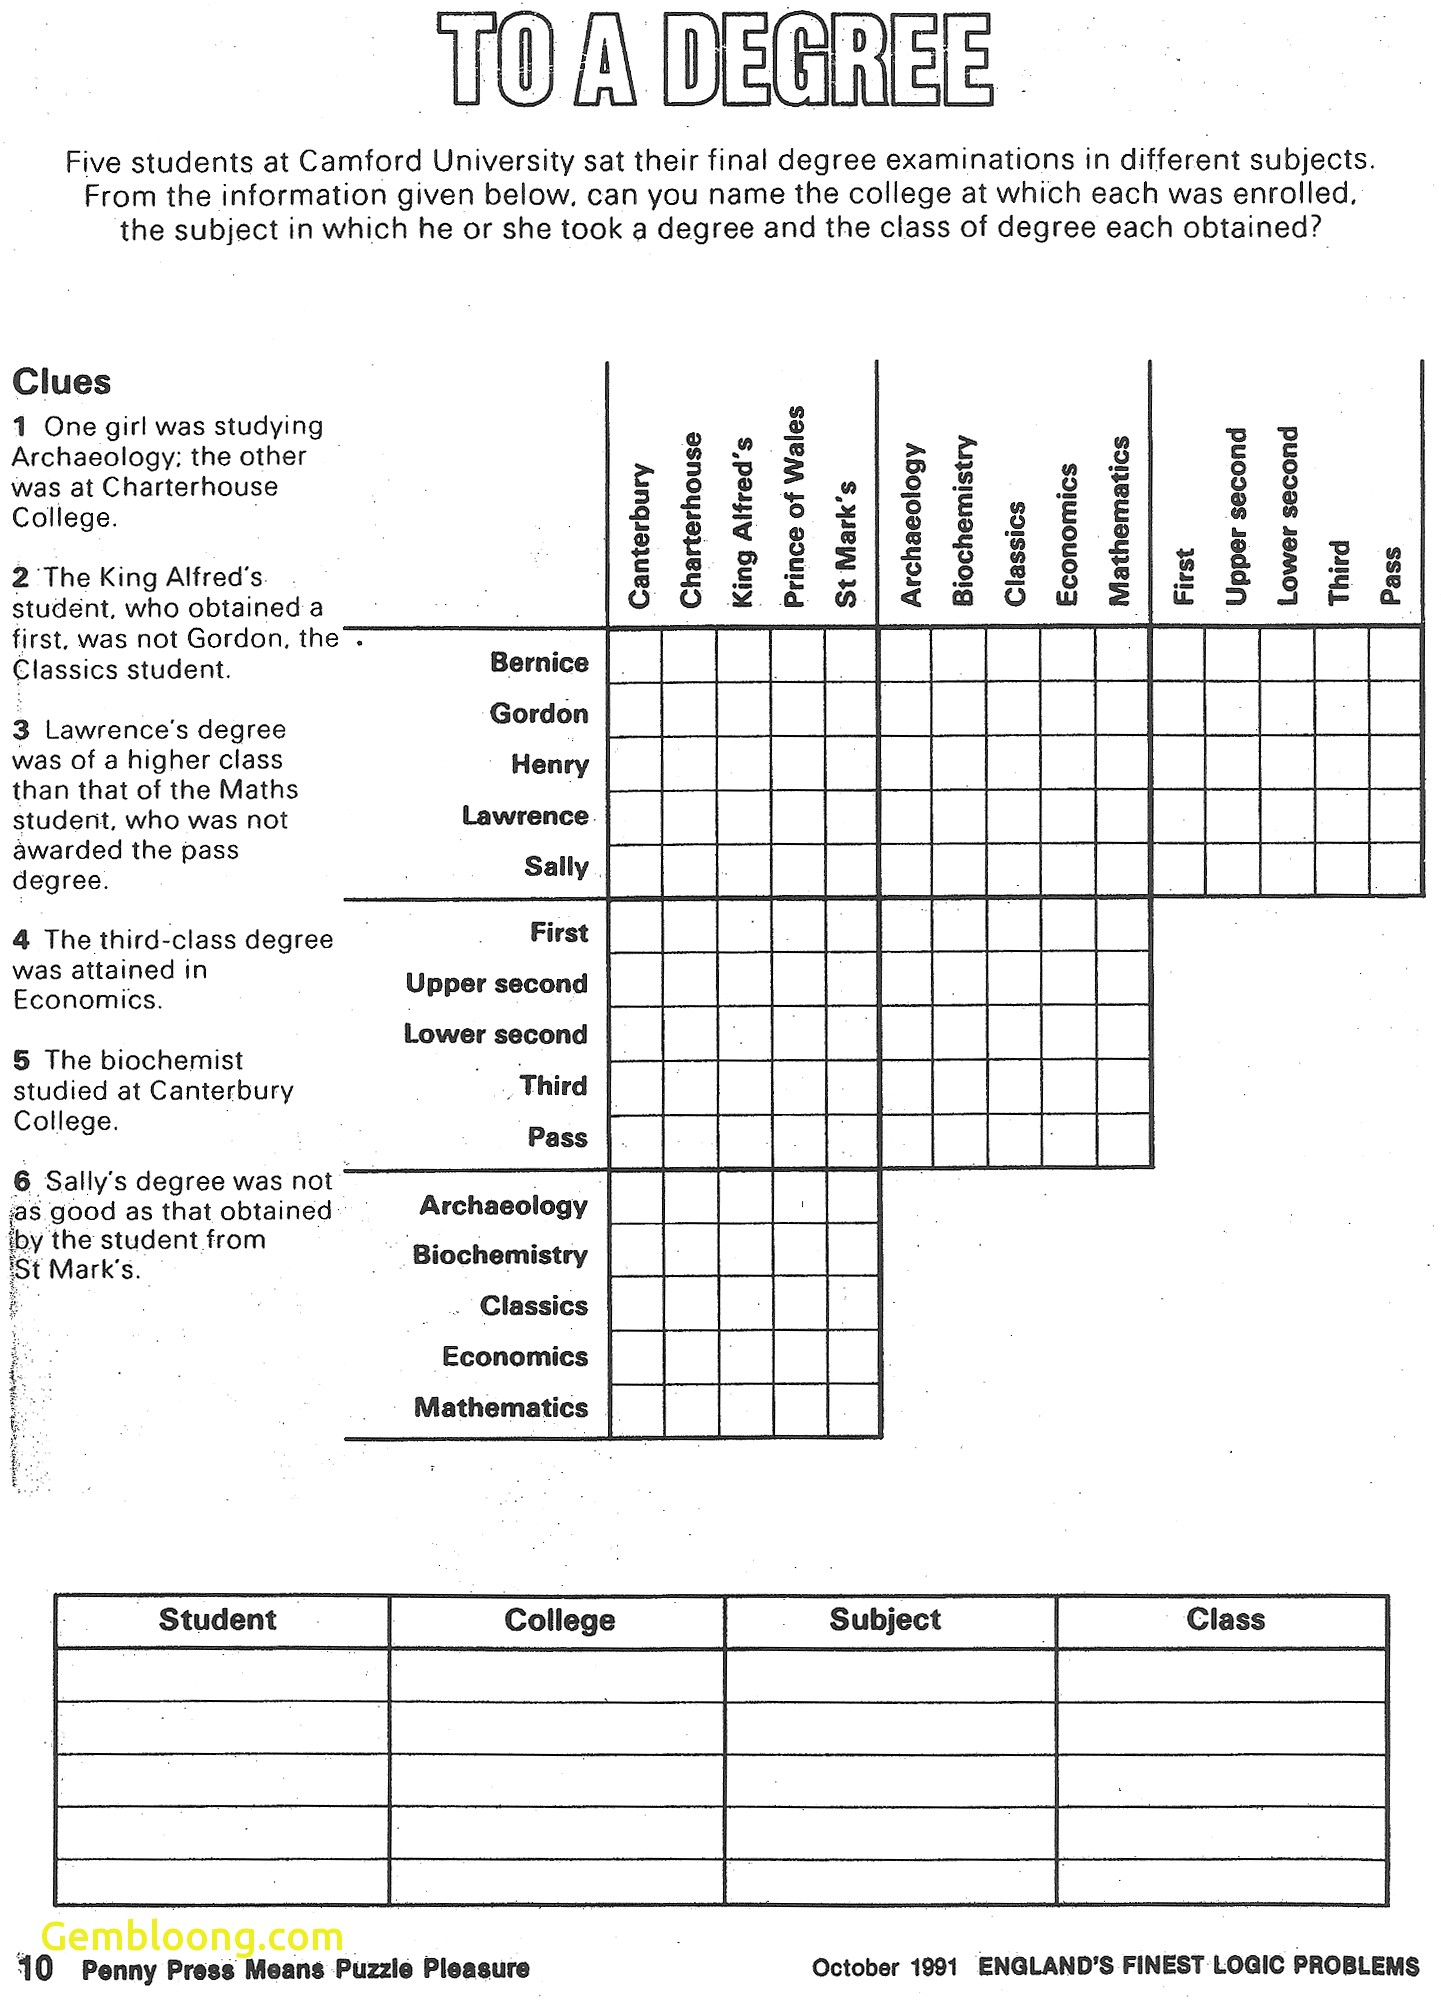 Free Printable Logic Puzzles For High School Students | Free Printables - Printable Logic Puzzles Pdf